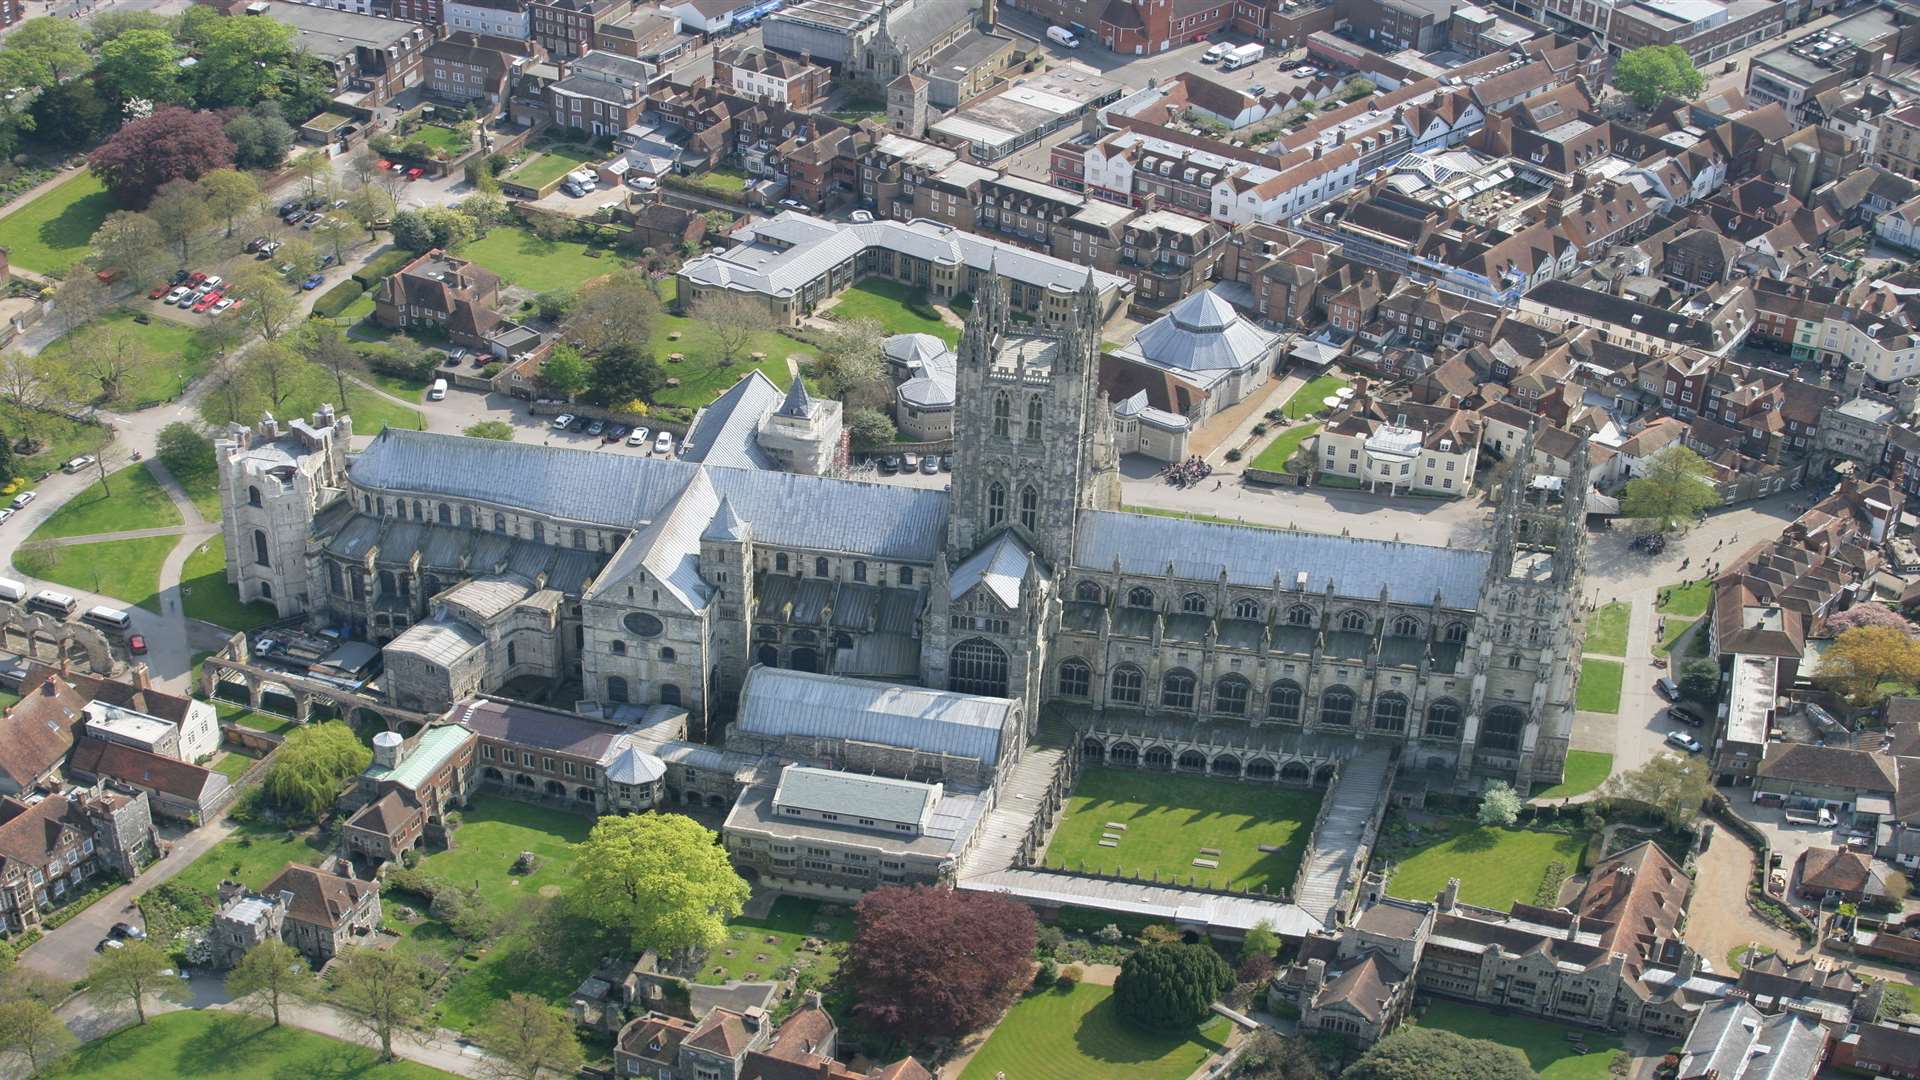 Canterbury is considering a bid to become the UK City of Culture 2025